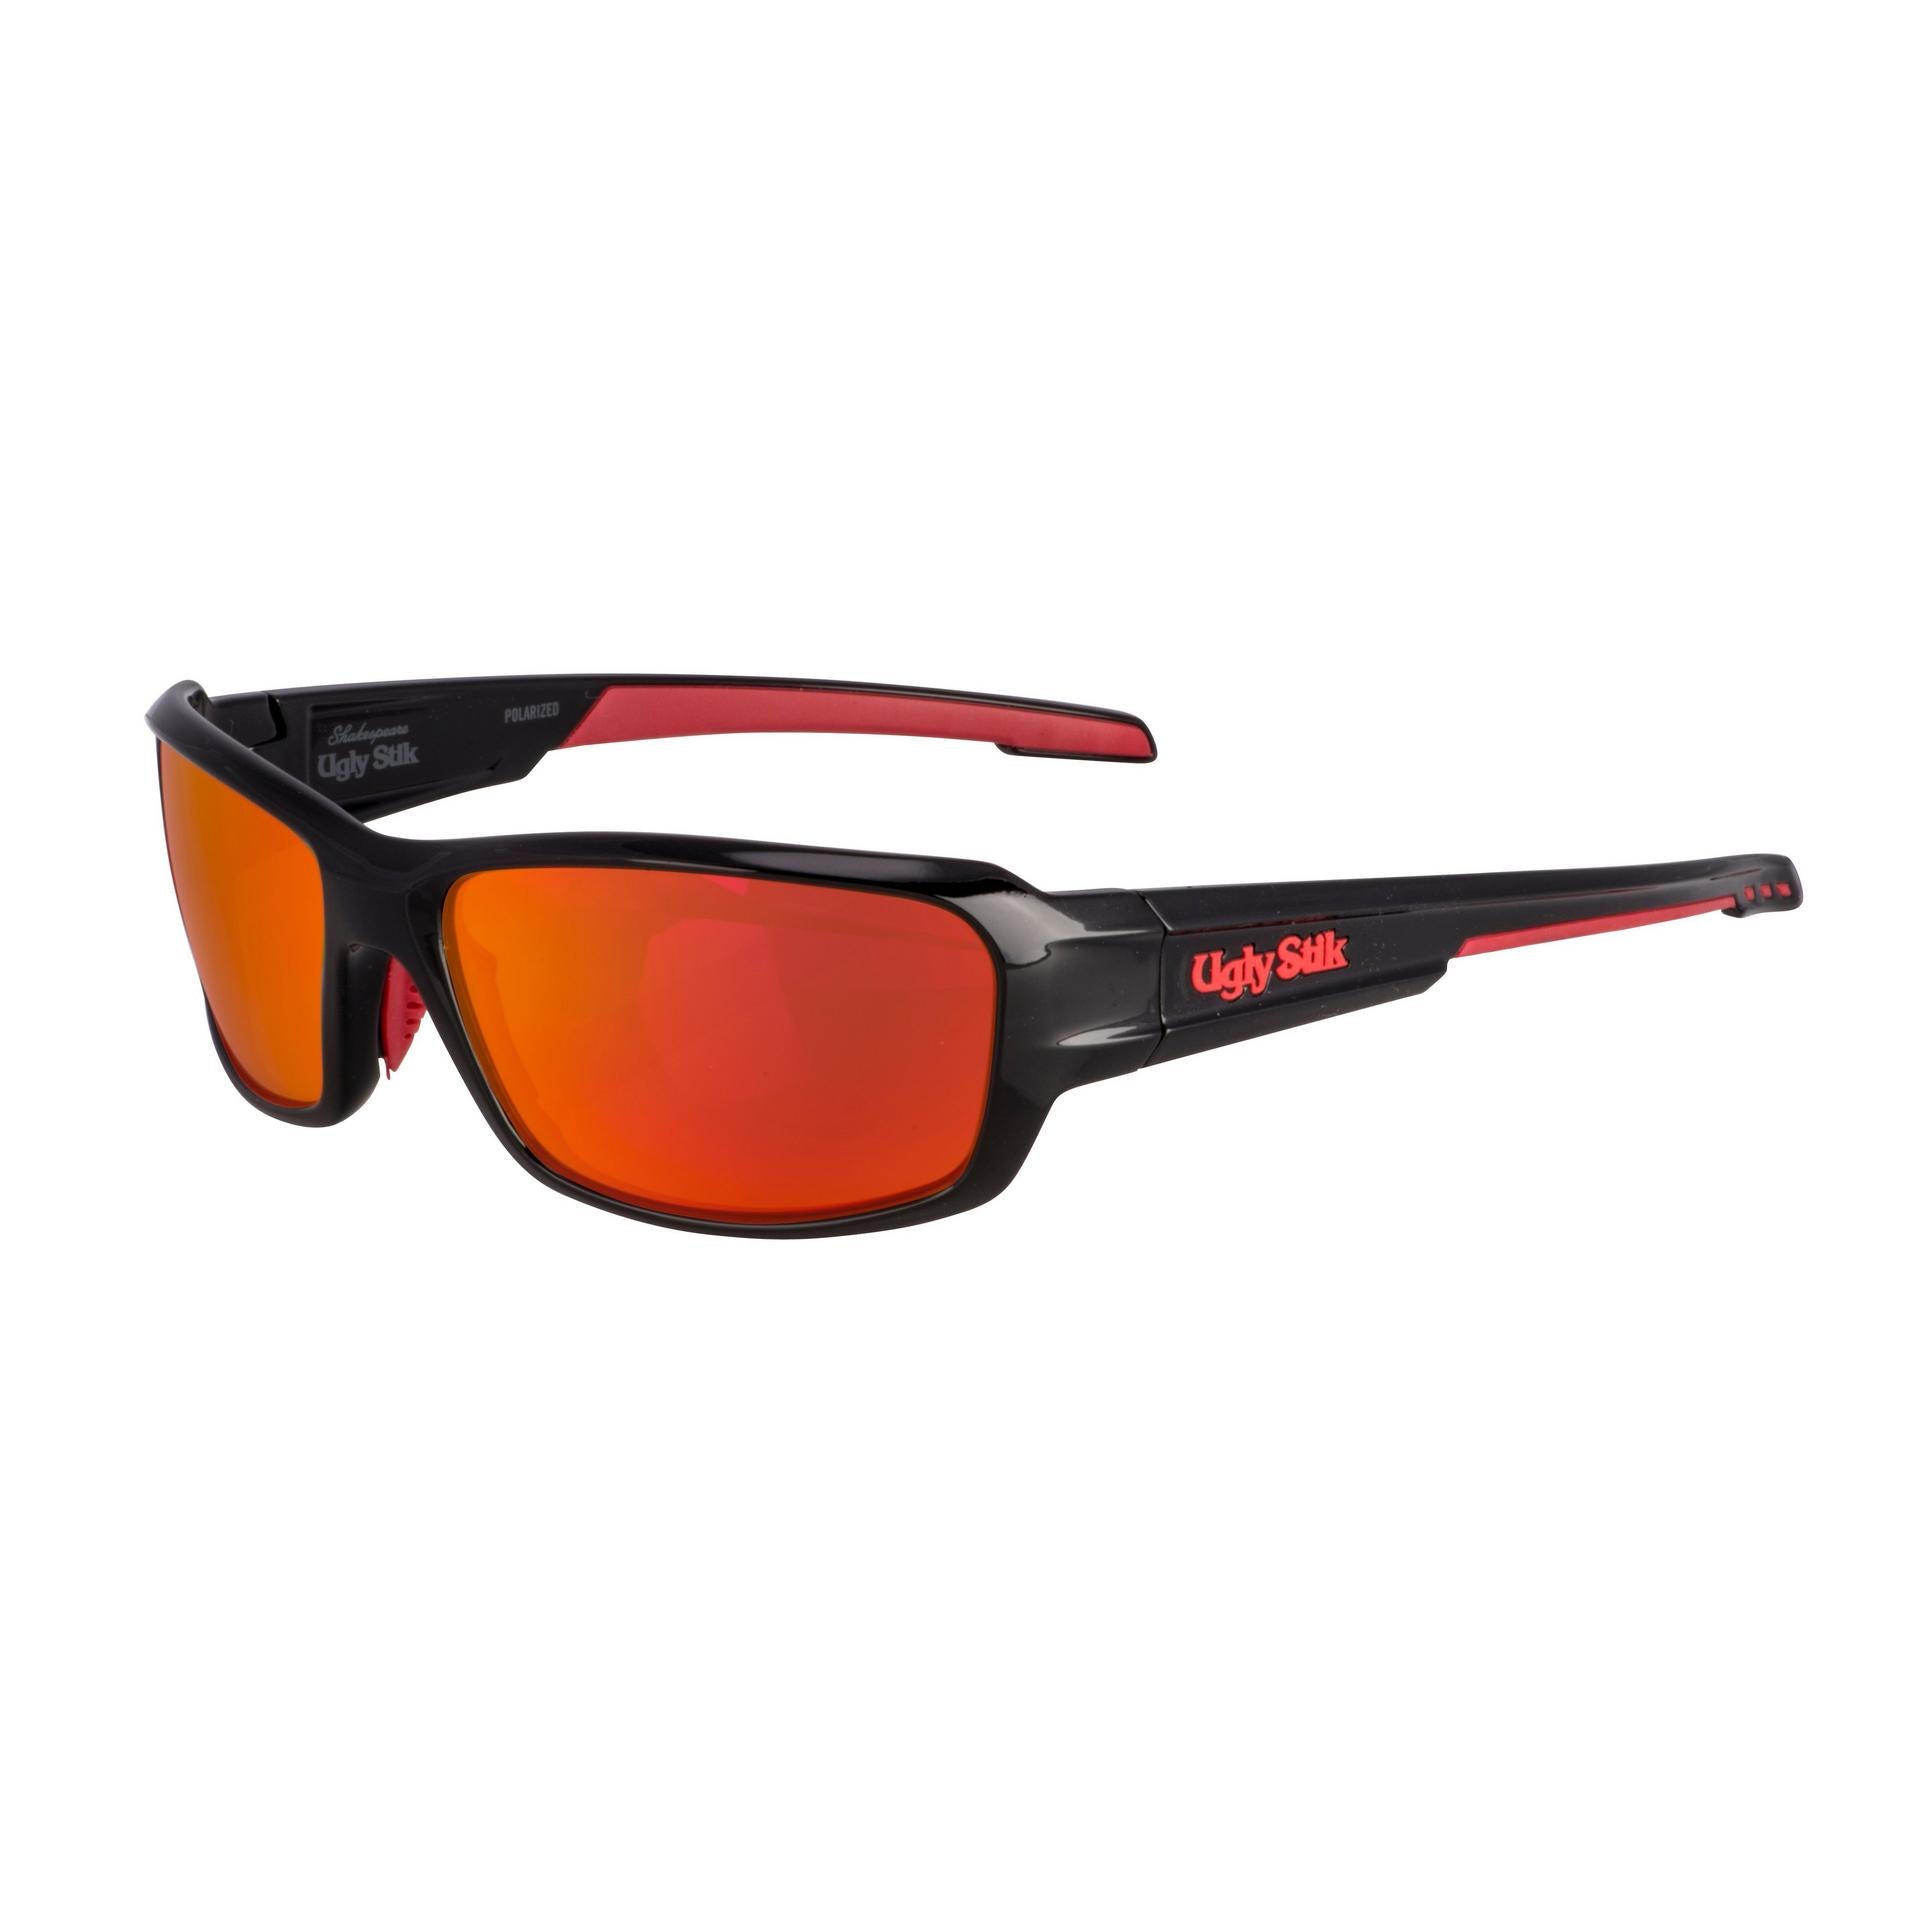 Black sunglasses with red lens